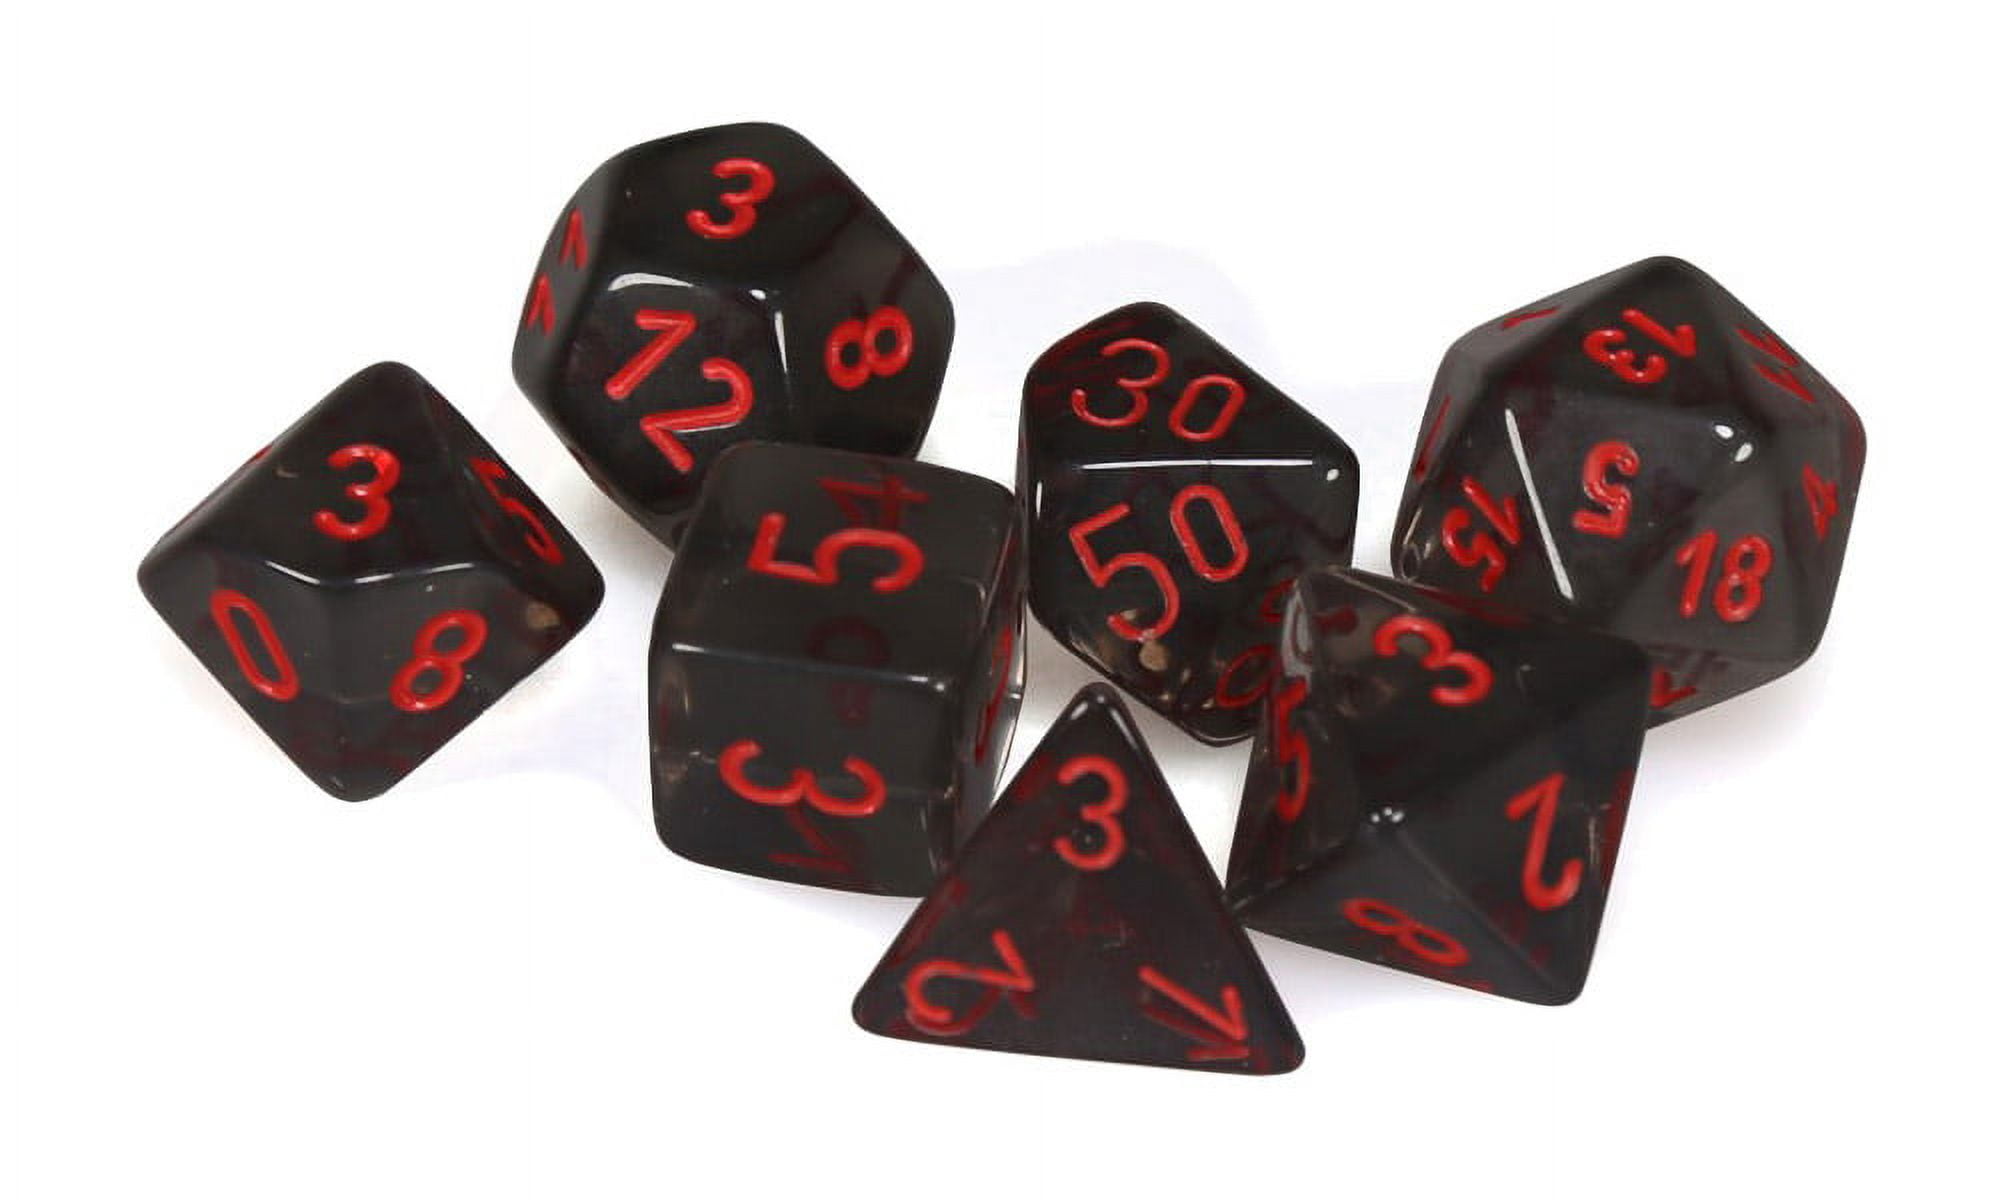 Manufacturing Chx23088 Cube Polyhedral Die, Translucent Smoke & Red - Set Of 7